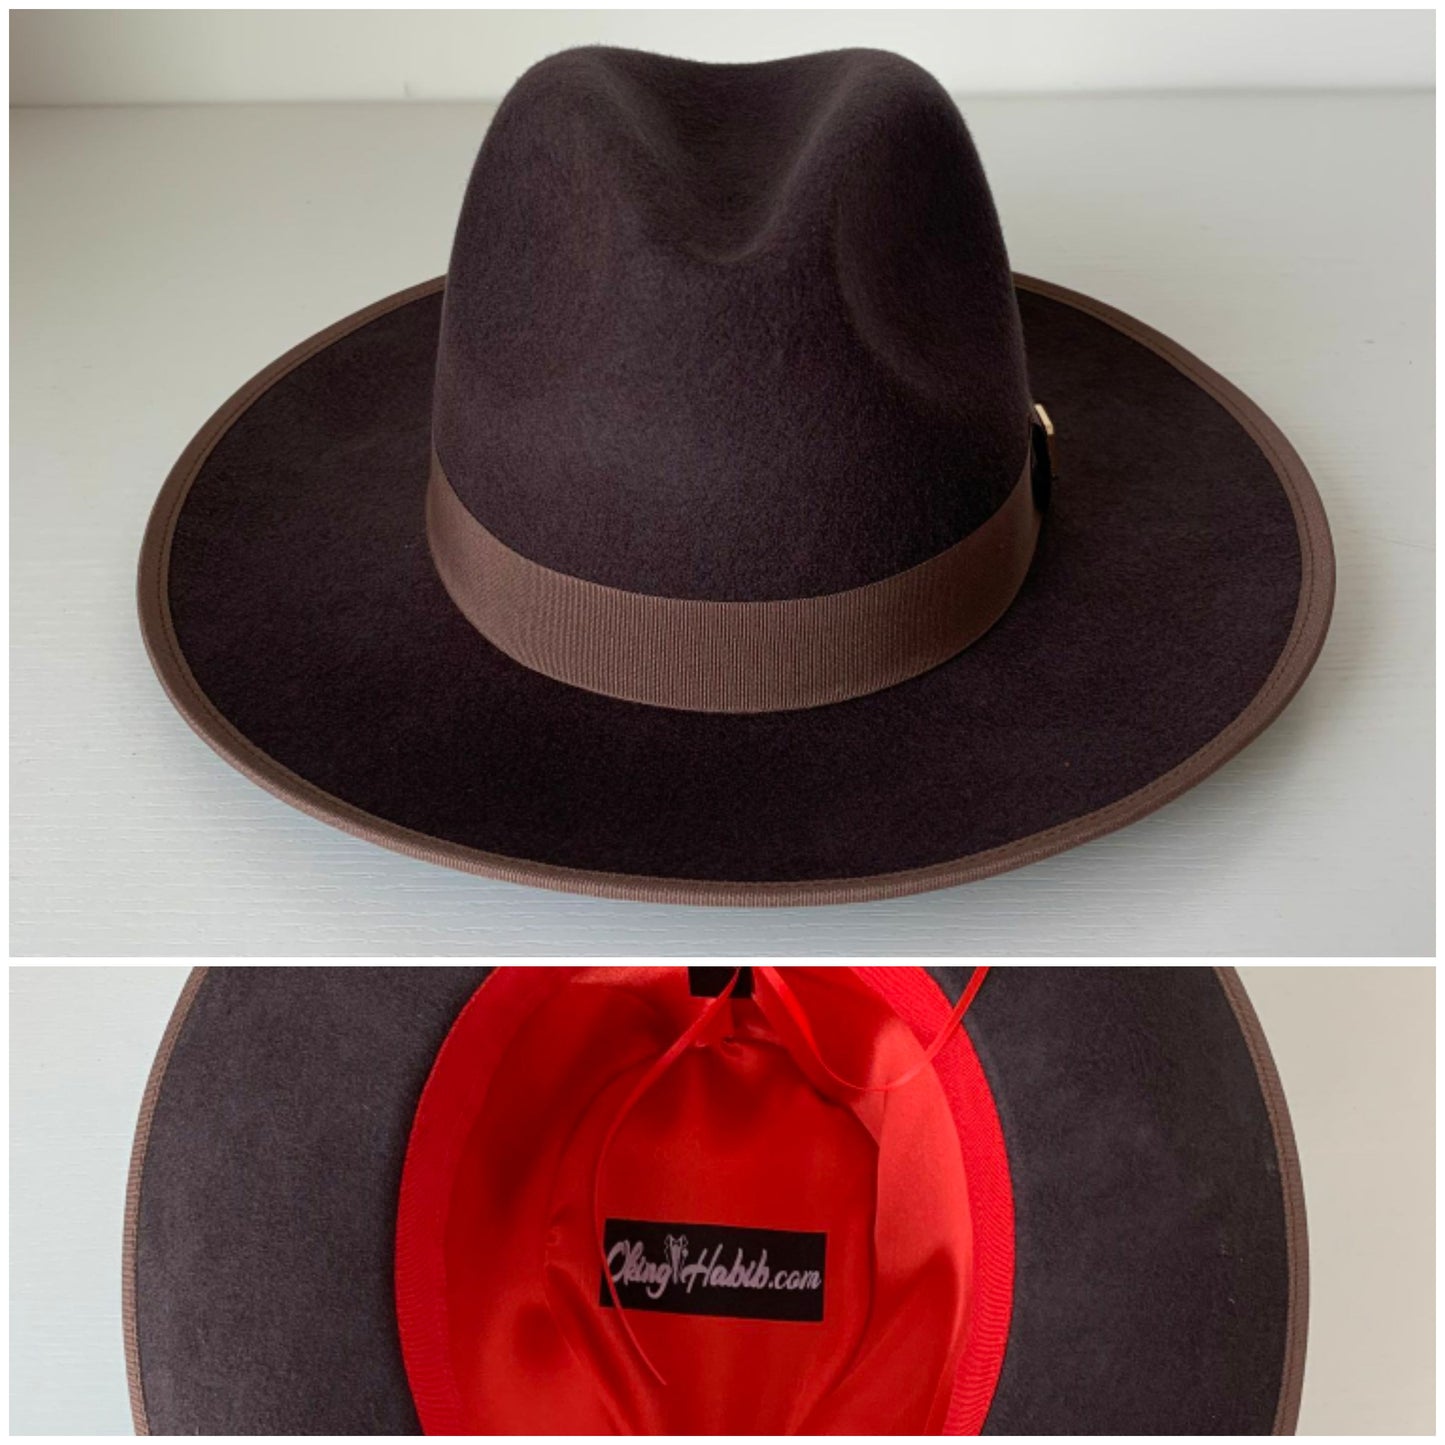 Fedora Private Collection